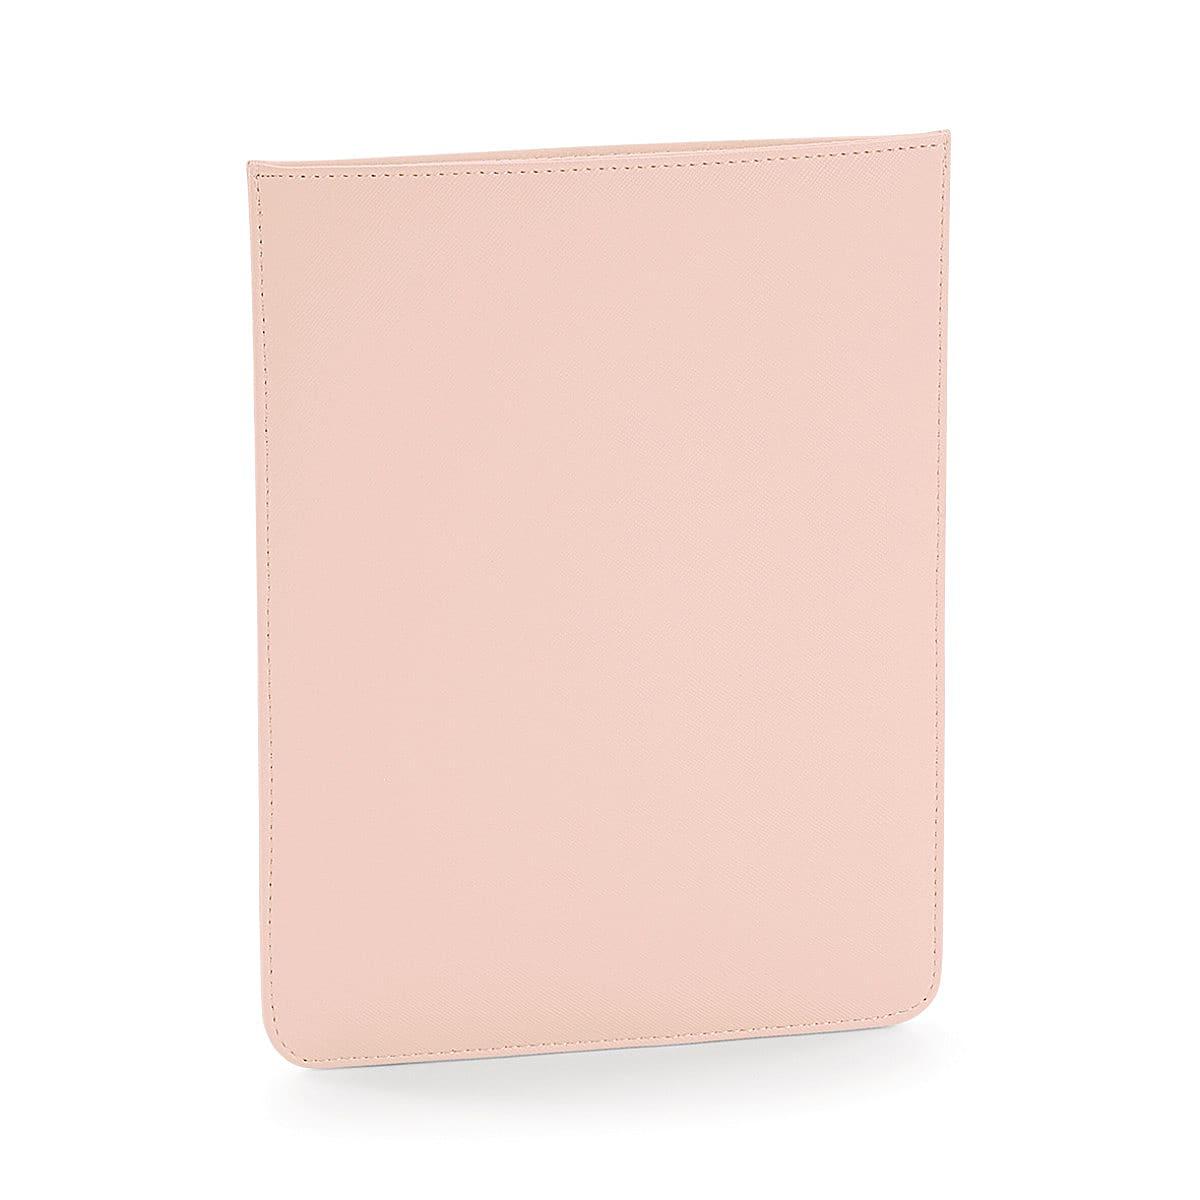 Bagbase Boutique iPad Slip in Soft Pink (Product Code: BG753)